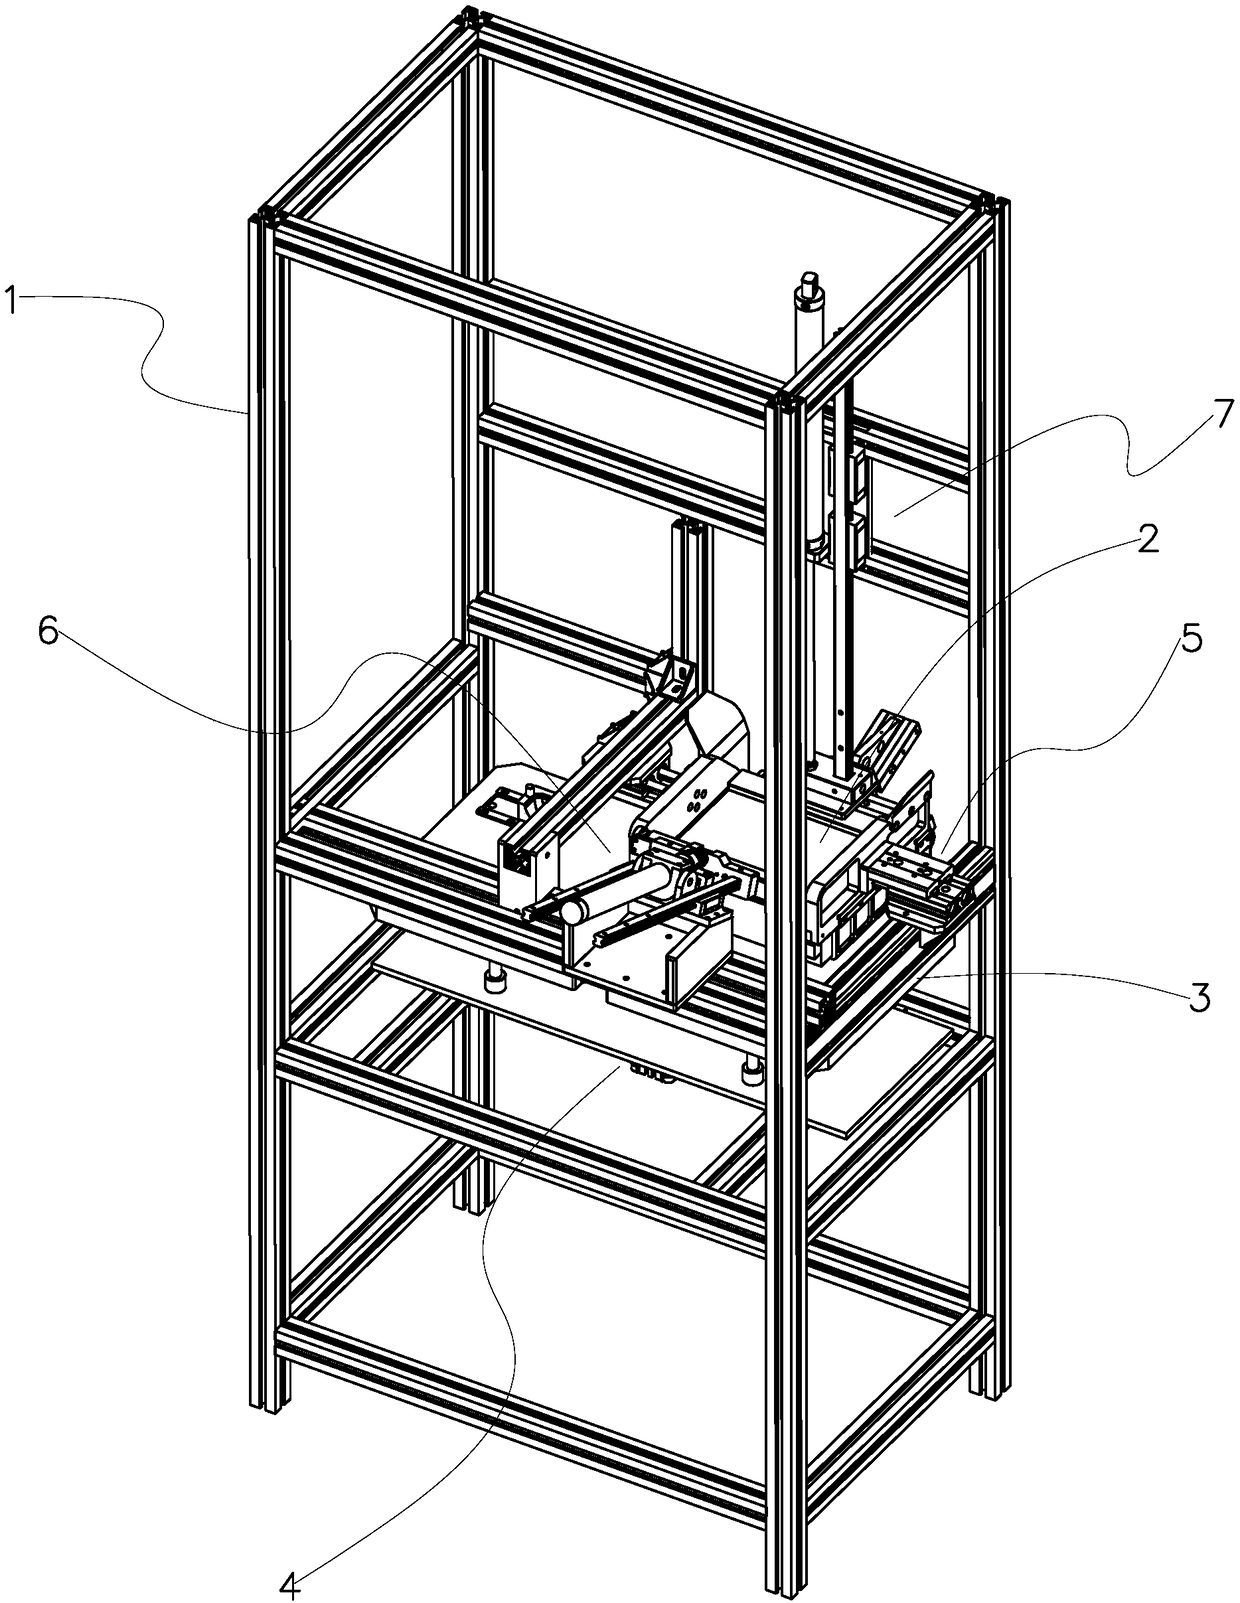 A device for automatically buckling packaging boxes